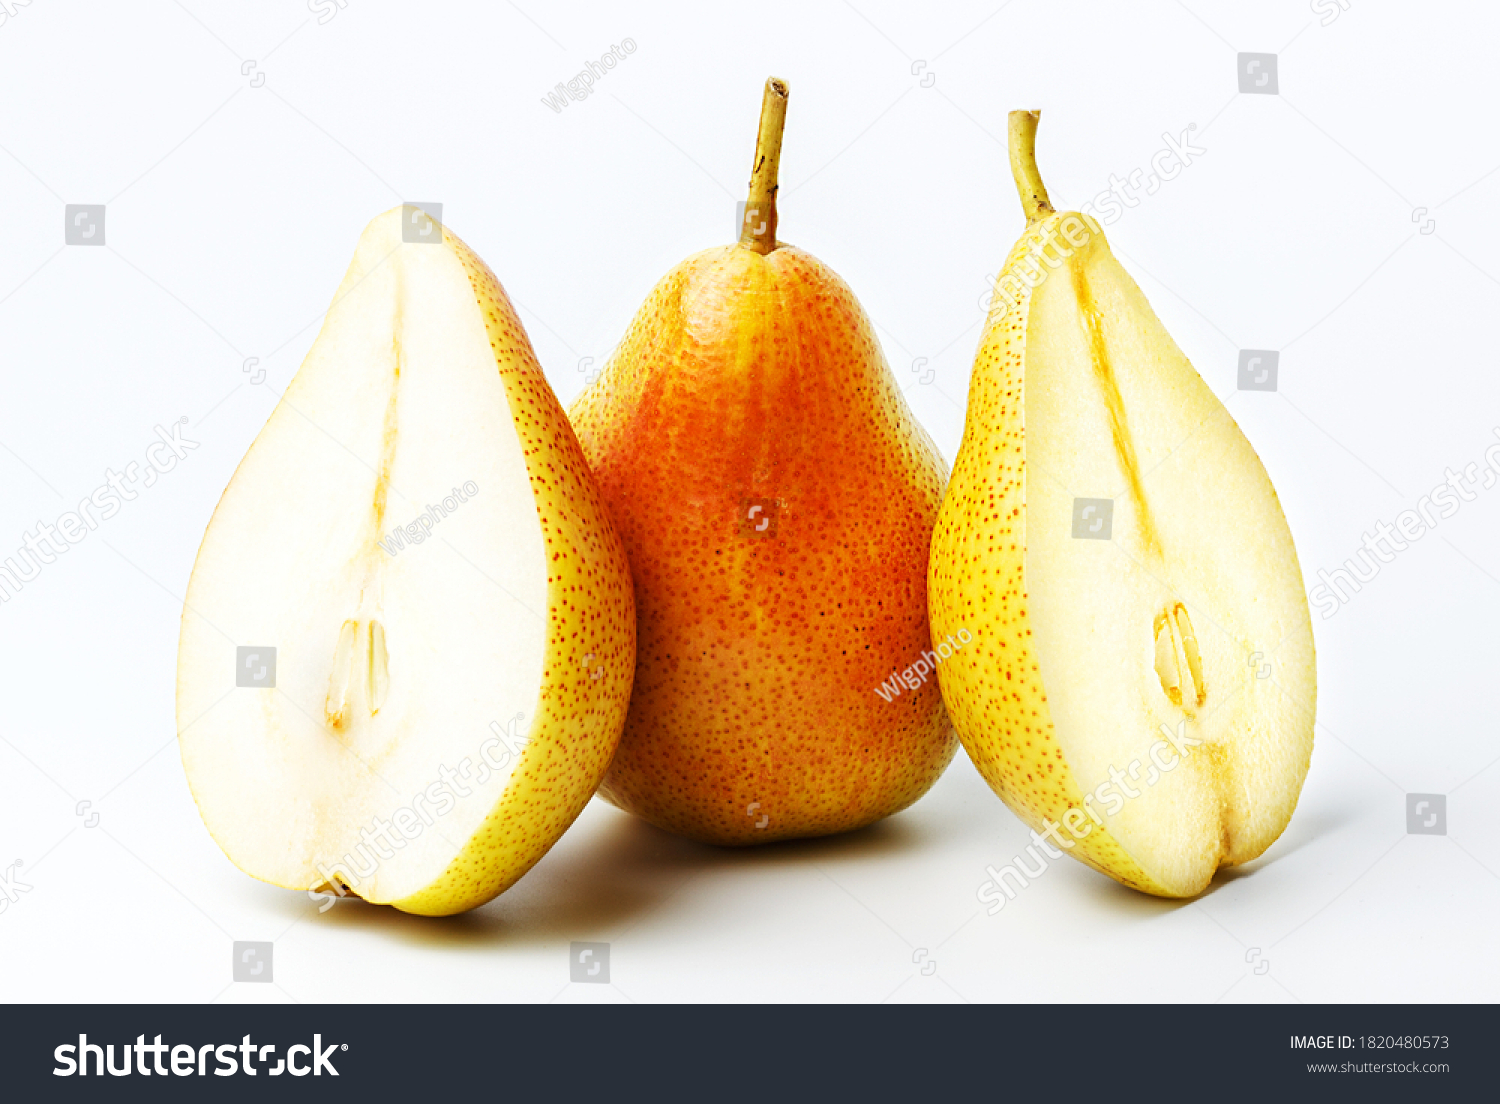 Whole and two half  pears on an isolated background. Big plan. #1820480573